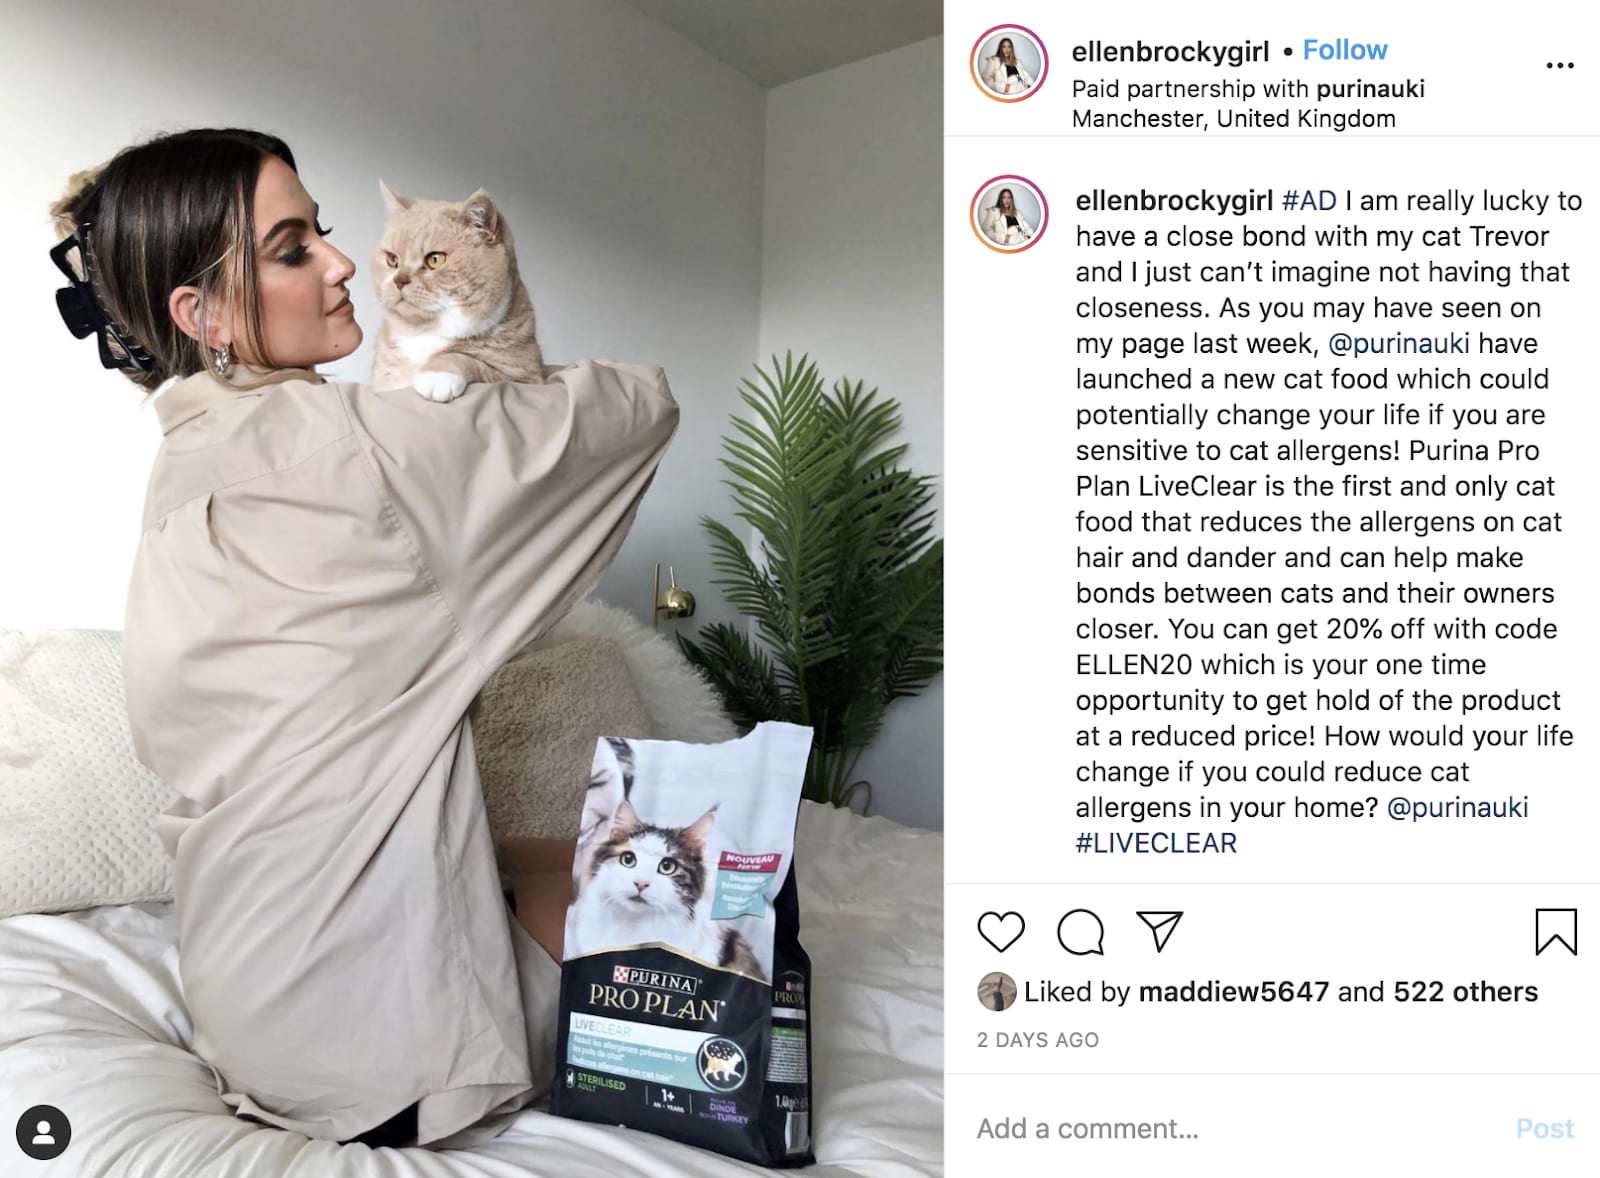 An Instagram post by @ellenbrockygirl with a cat, talking about Purina cat food